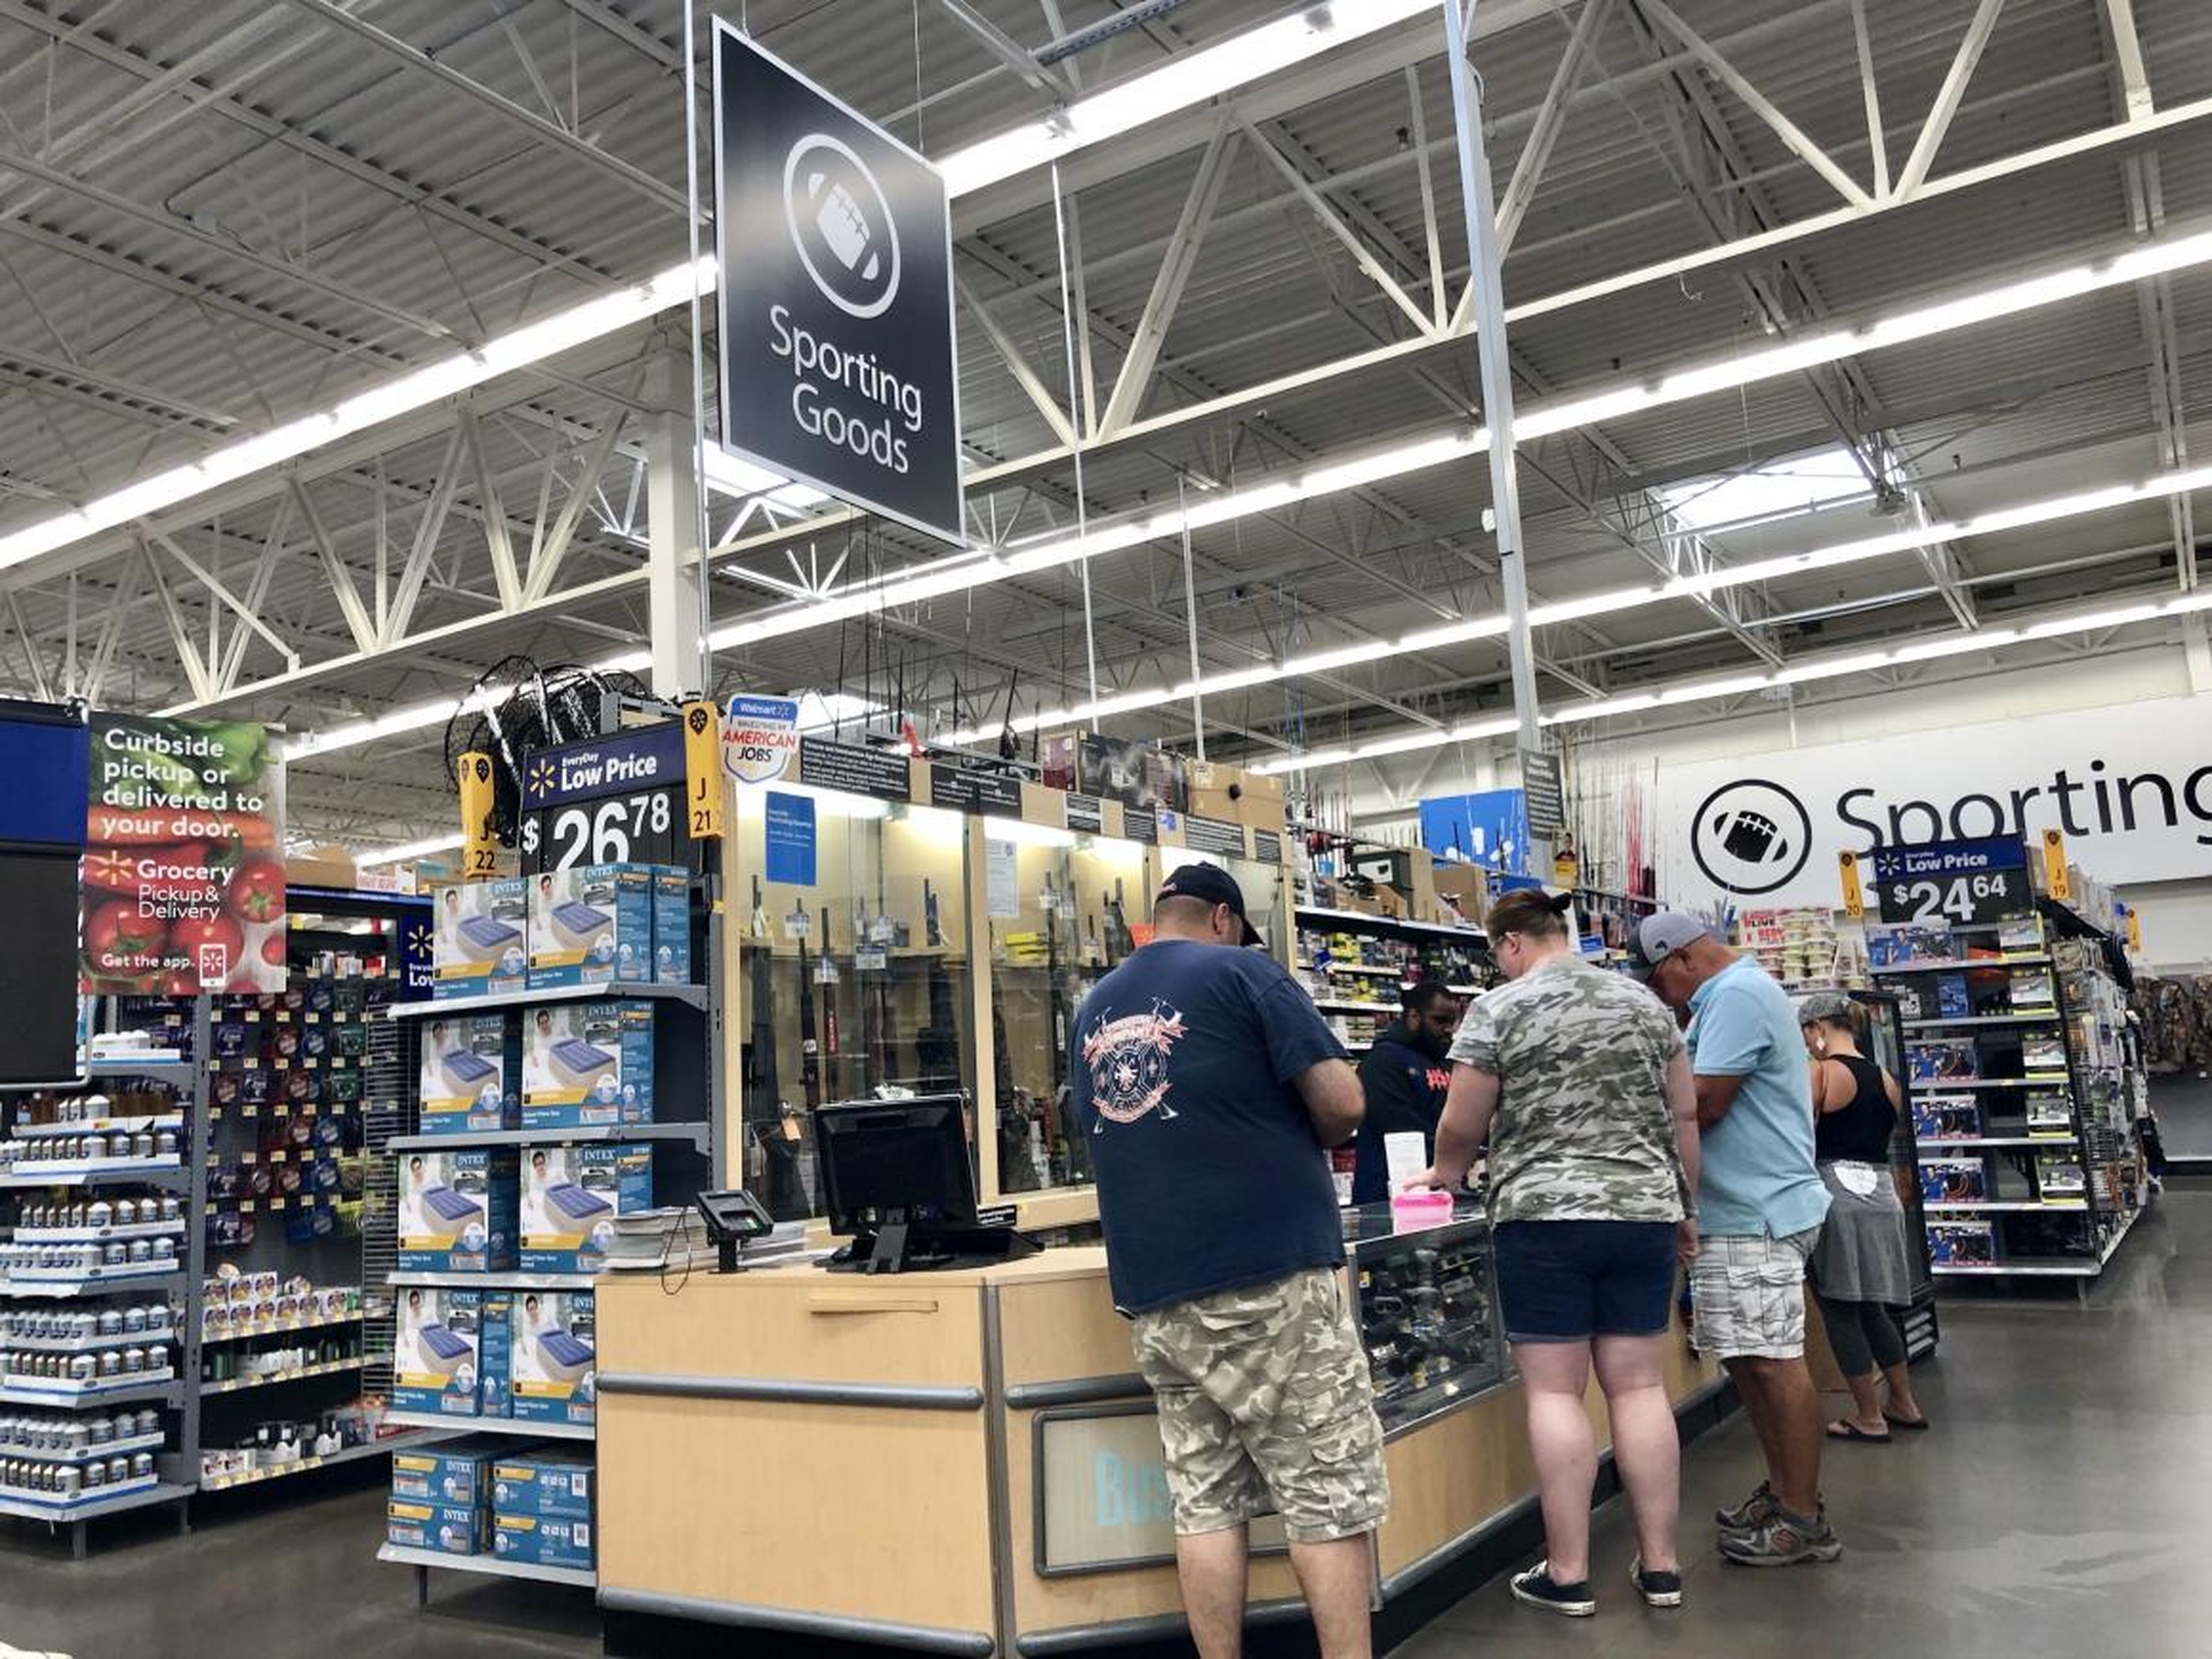 Overall, the experience left me with the impression that buying a gun at Walmart is more complicated than I expected, and that Walmart takes gun sales and security pretty seriously.